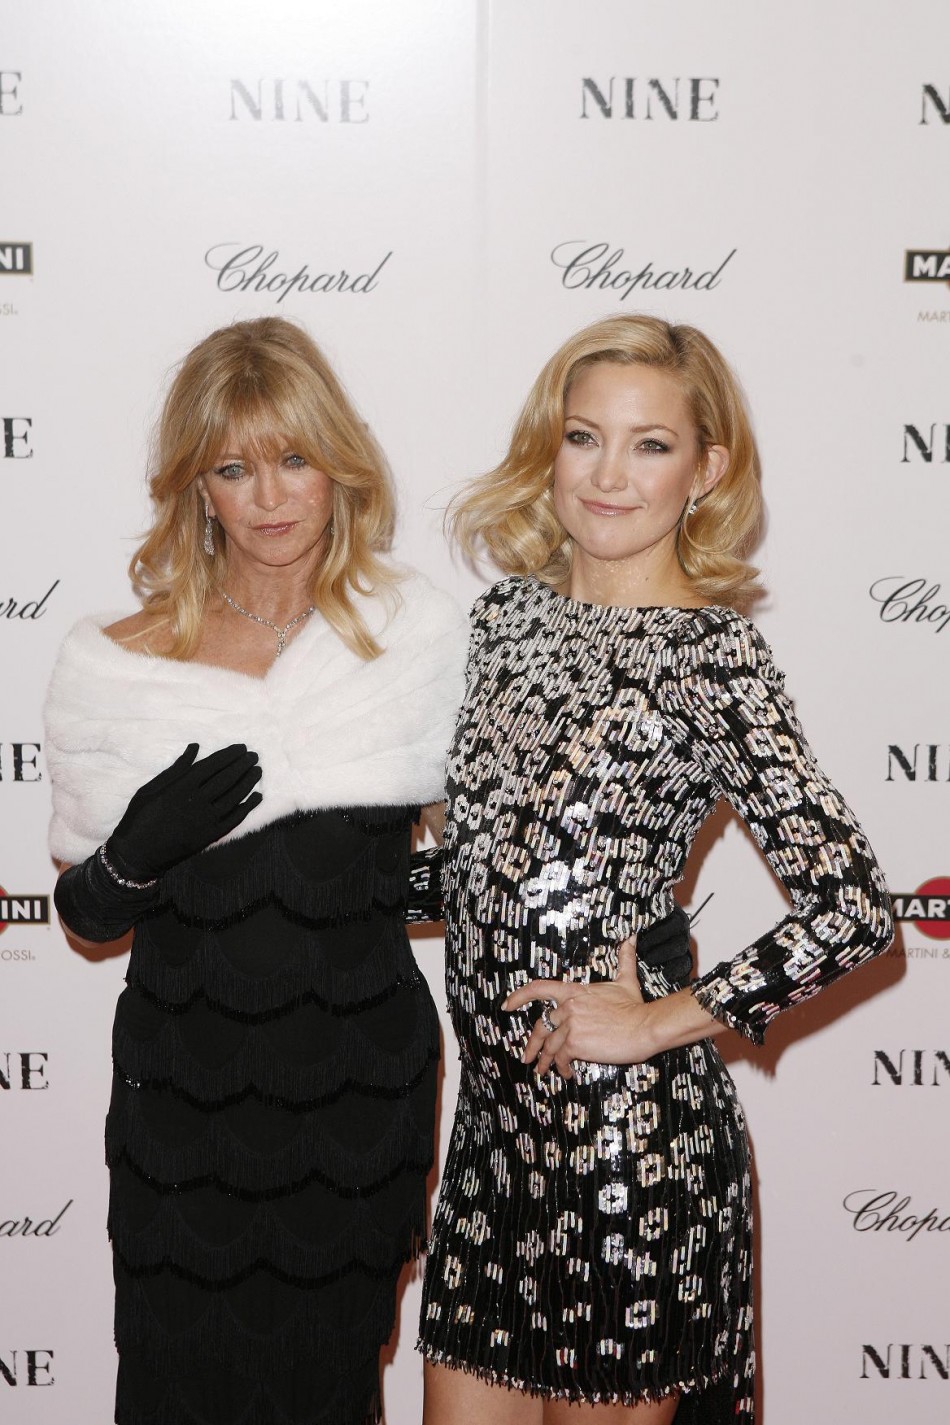 Cast member Kate Hudson arrives with her mother, Goldie Hawn, at the premiere of the film quotNinequot in New York.